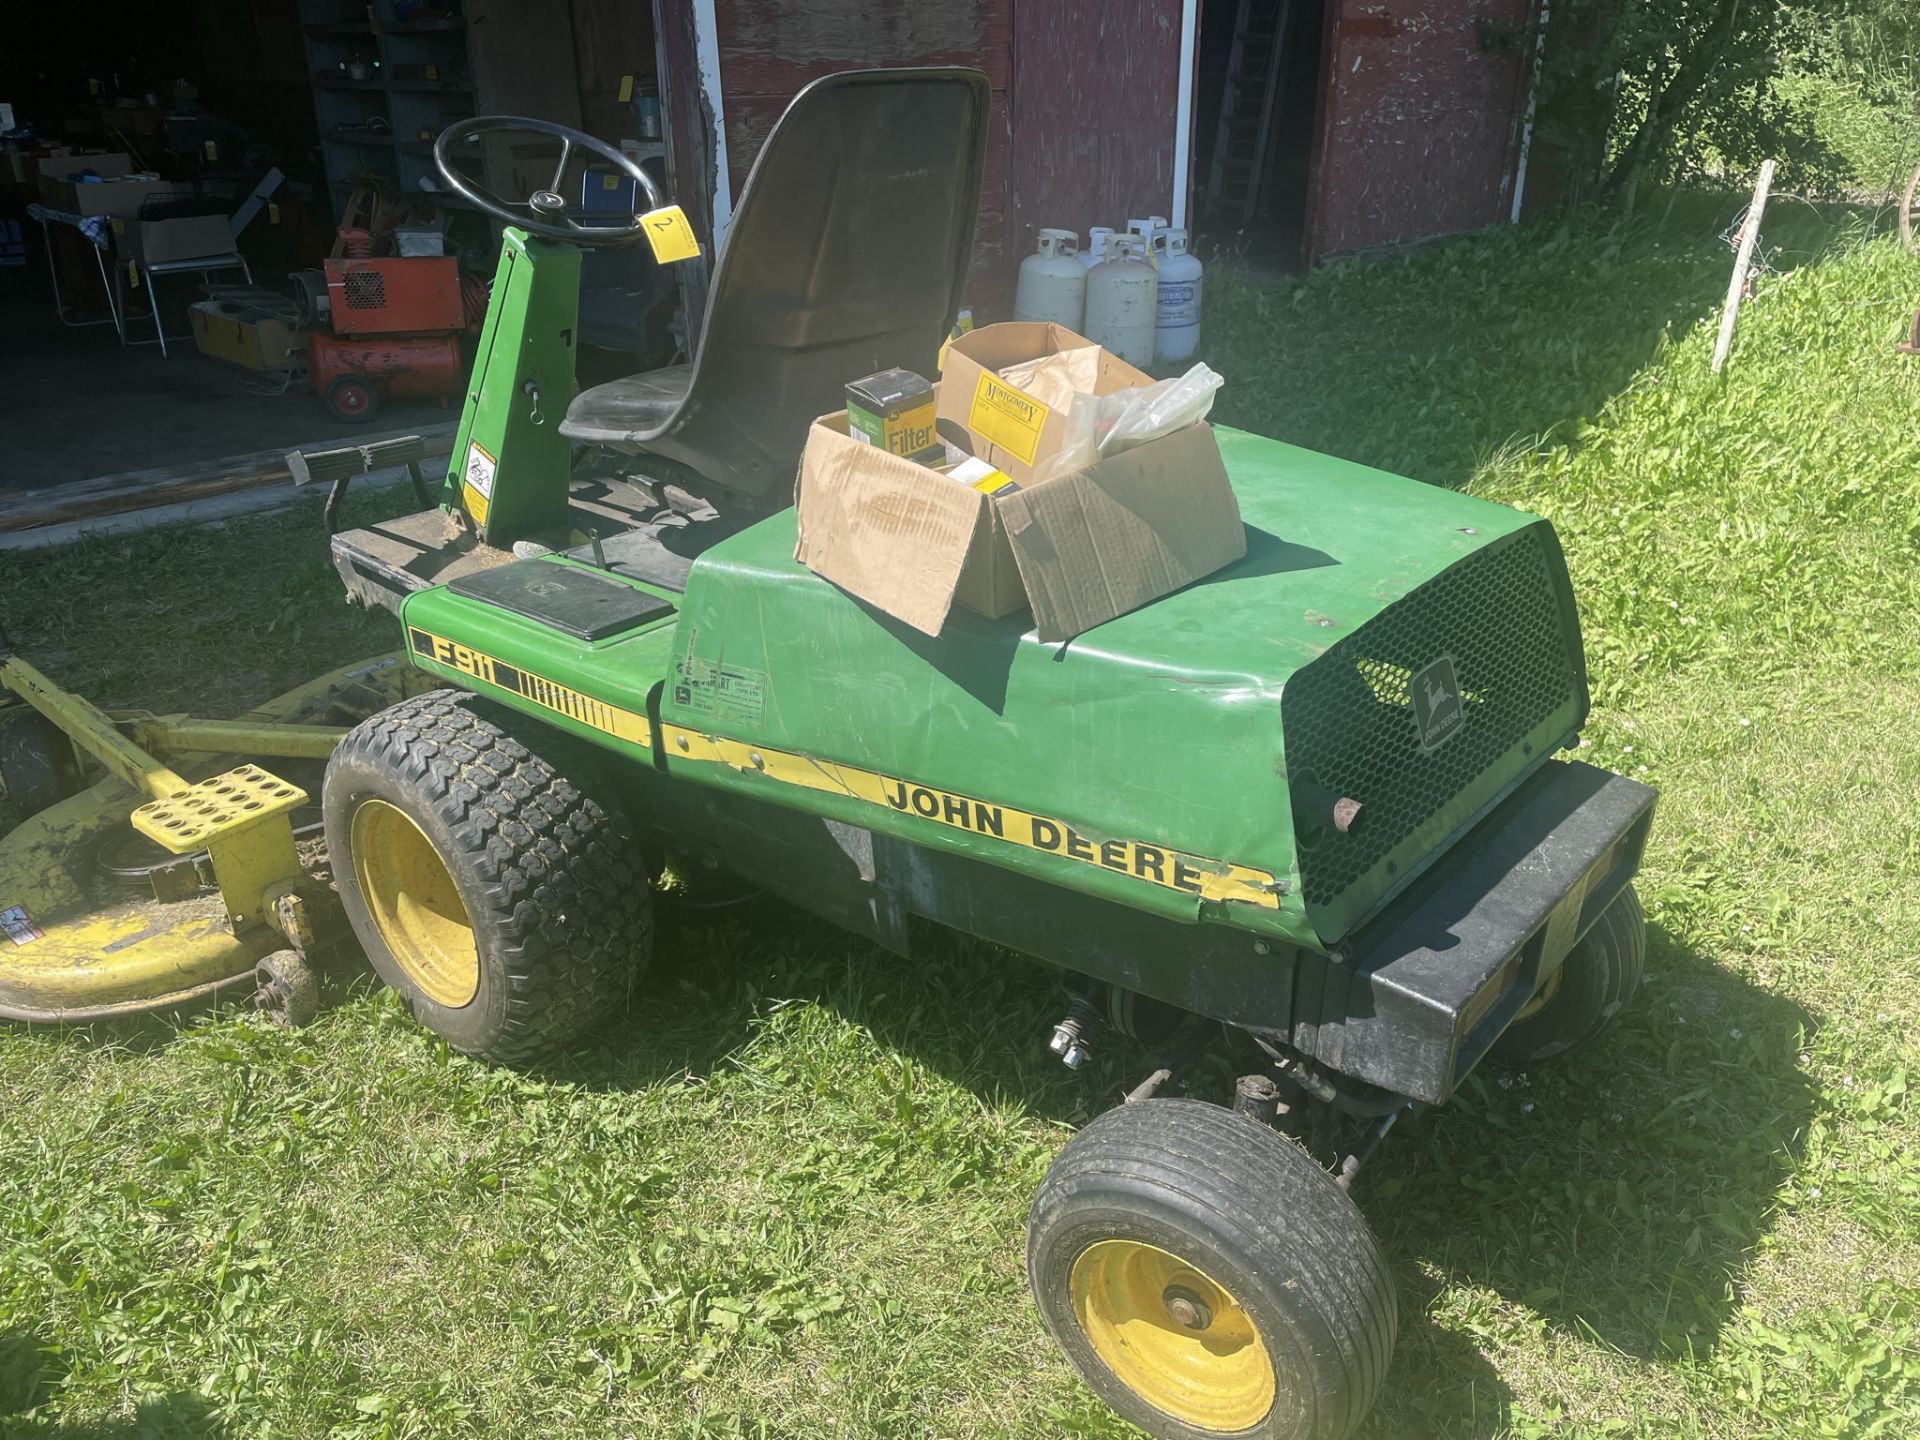 JOHN DEERE F911 FRONT MOUNT LAWN MOVER W/ 60” DECK, 2,286 HR SHOWING, S/N M0F911X100545 - Image 3 of 8